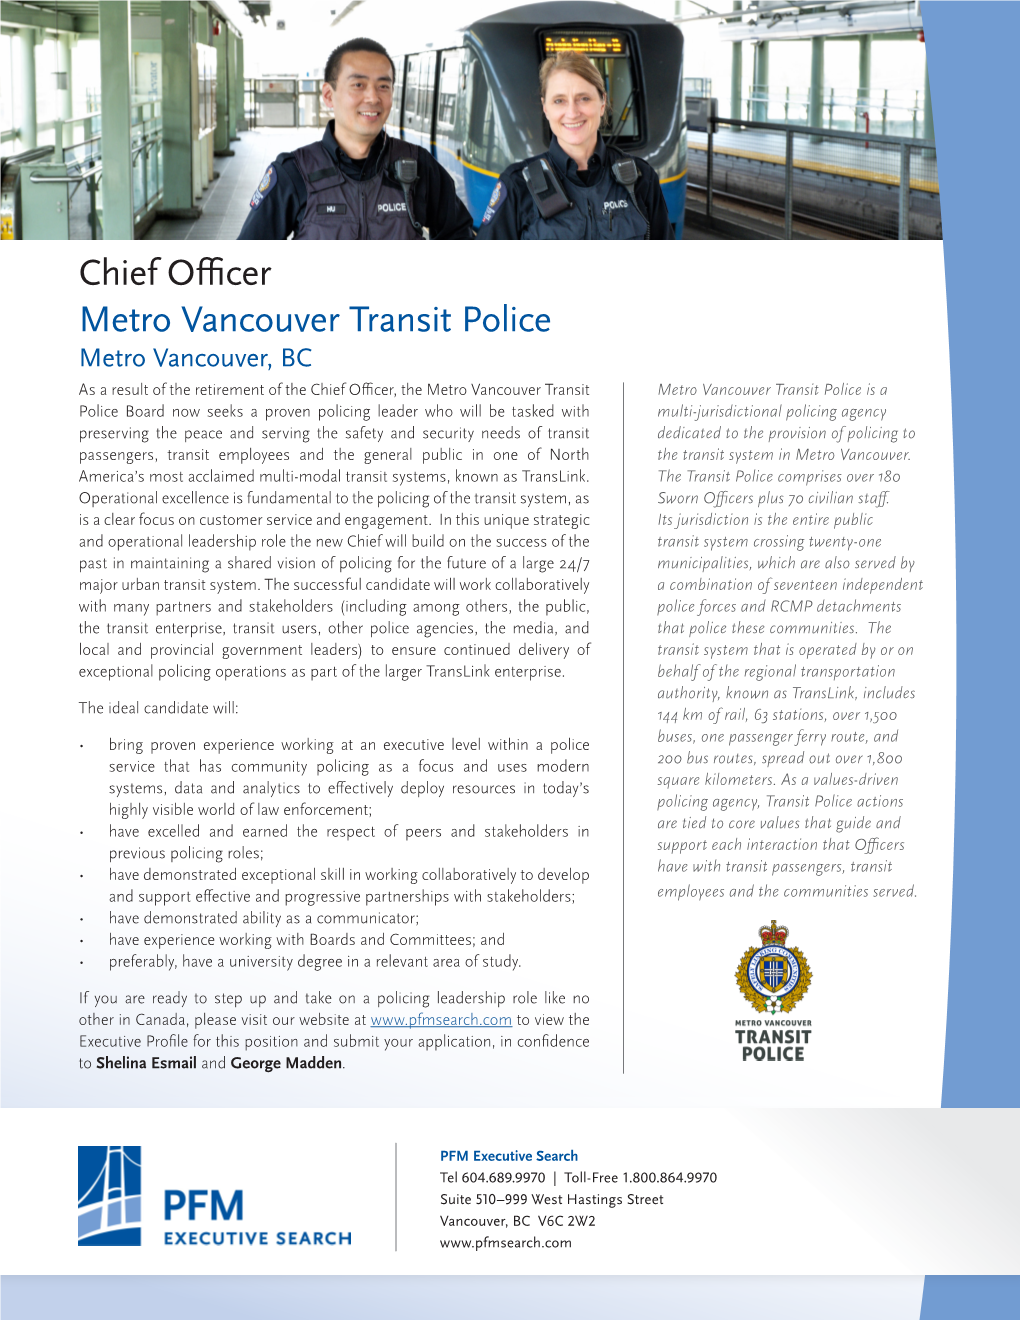 Chief Officer Metro Vancouver Transit Police